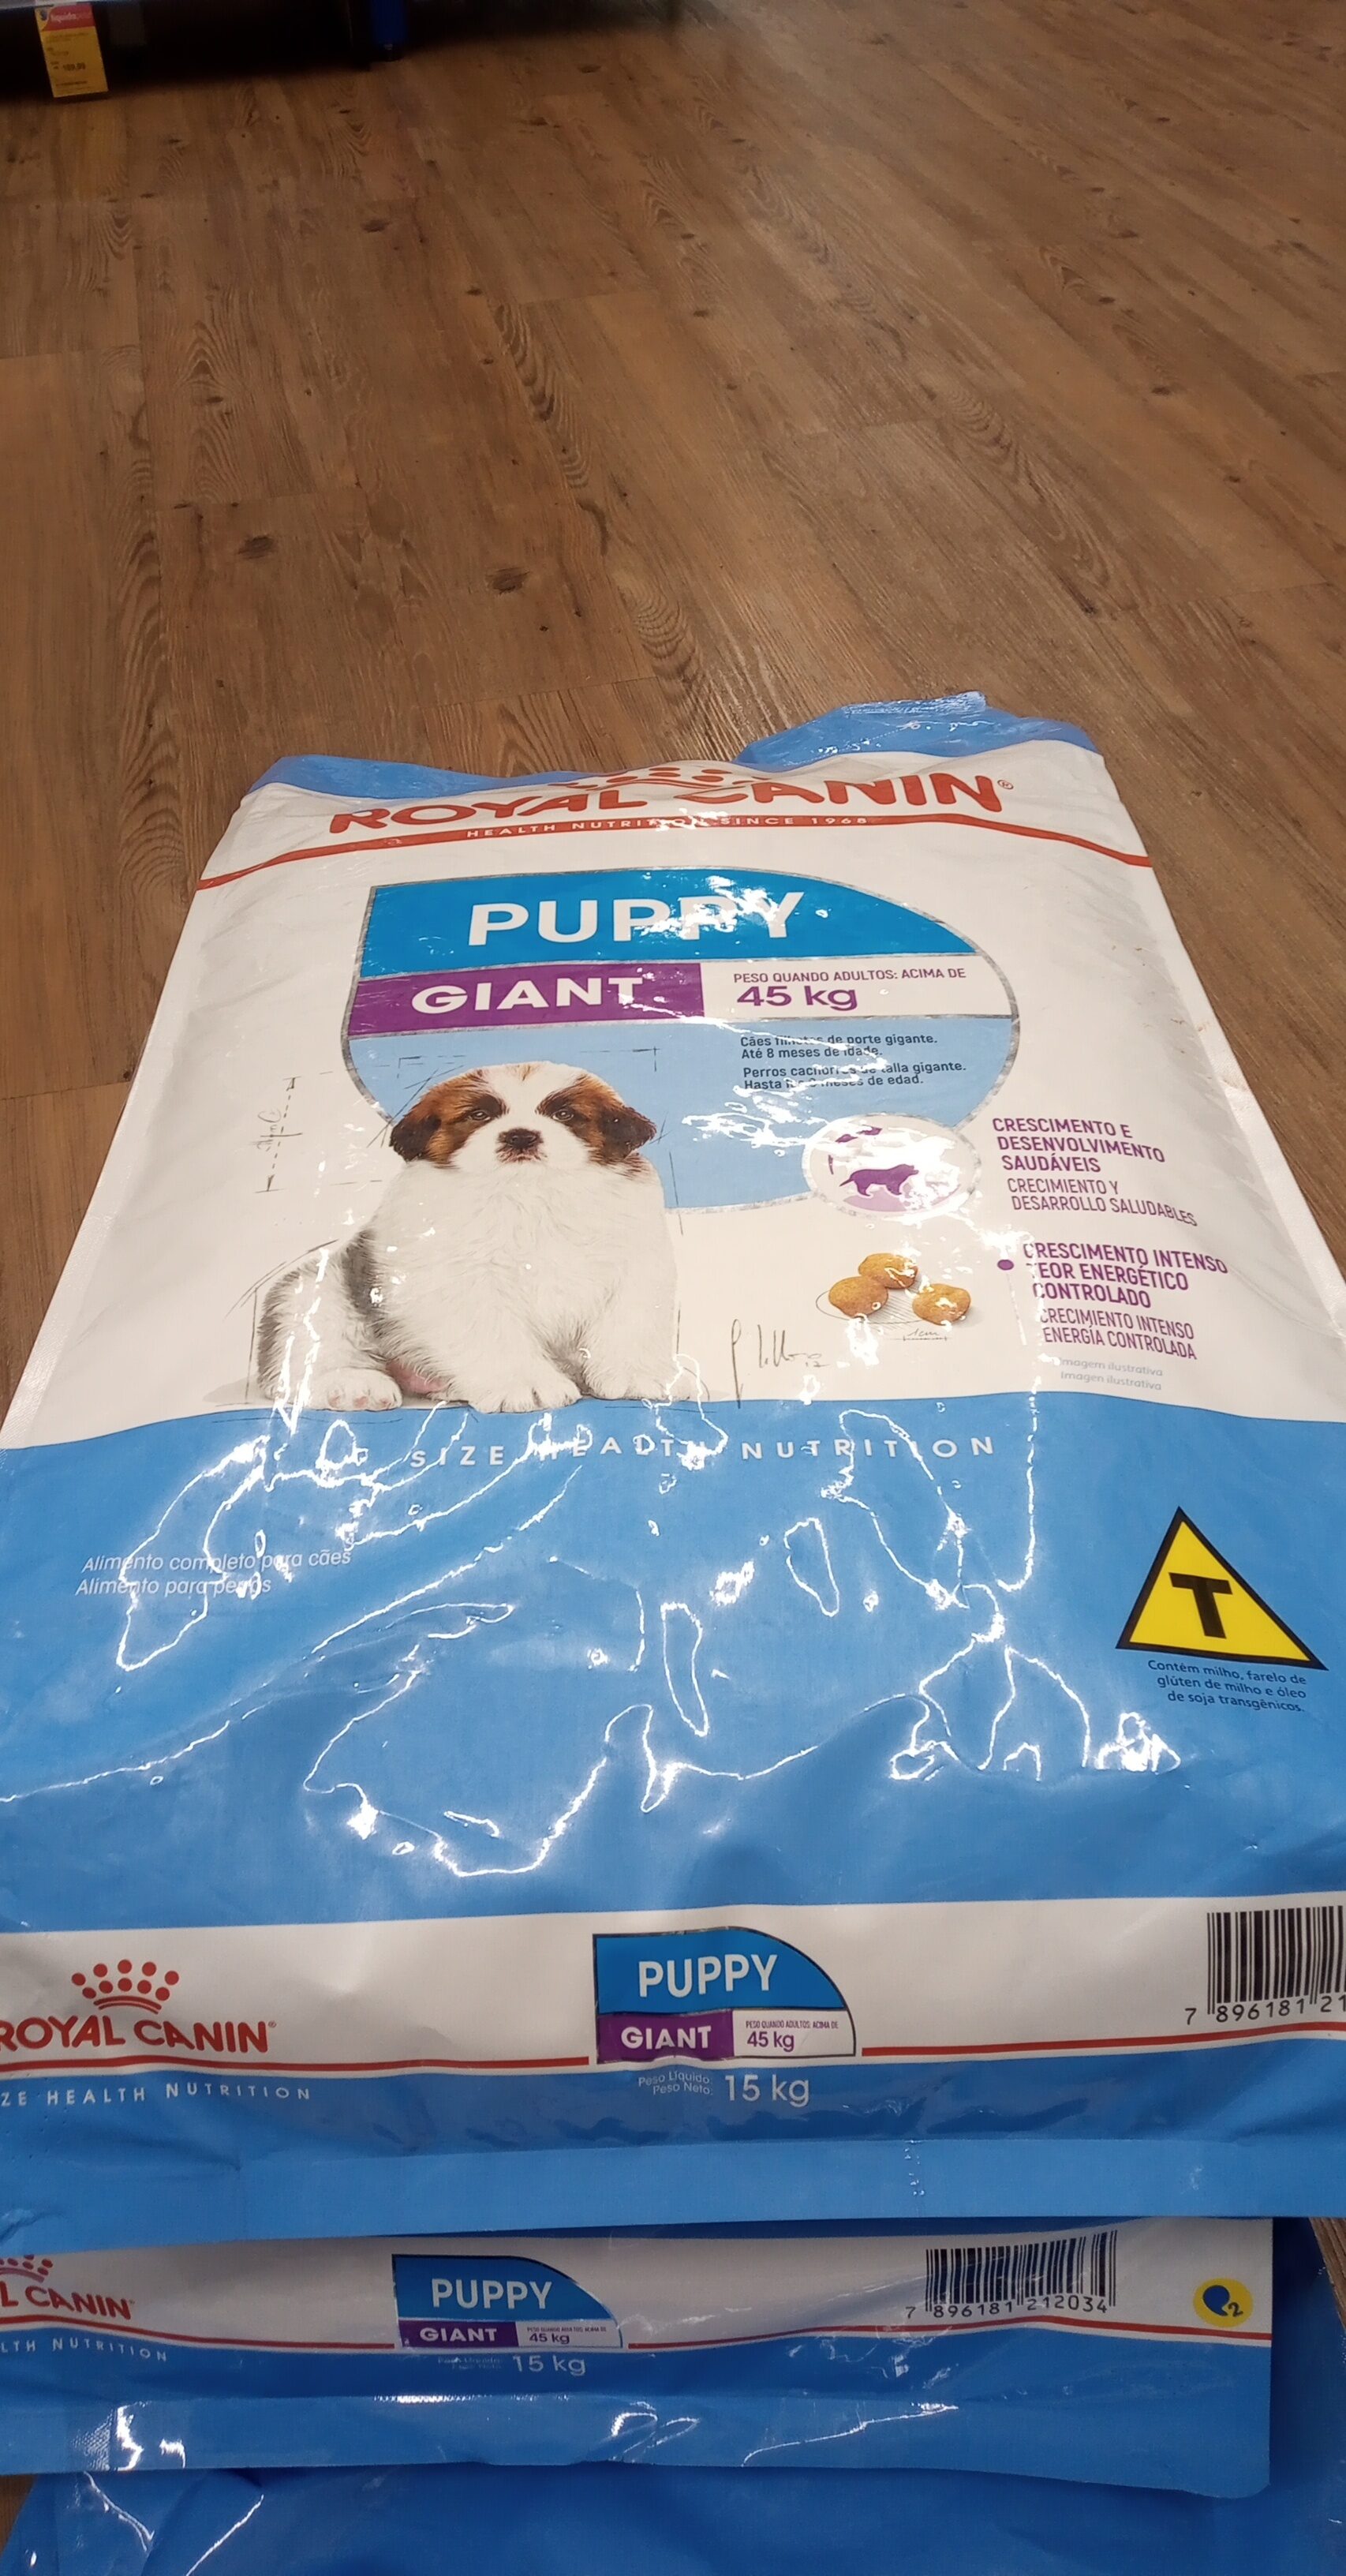 Royal canin puppy giant - Product - pt